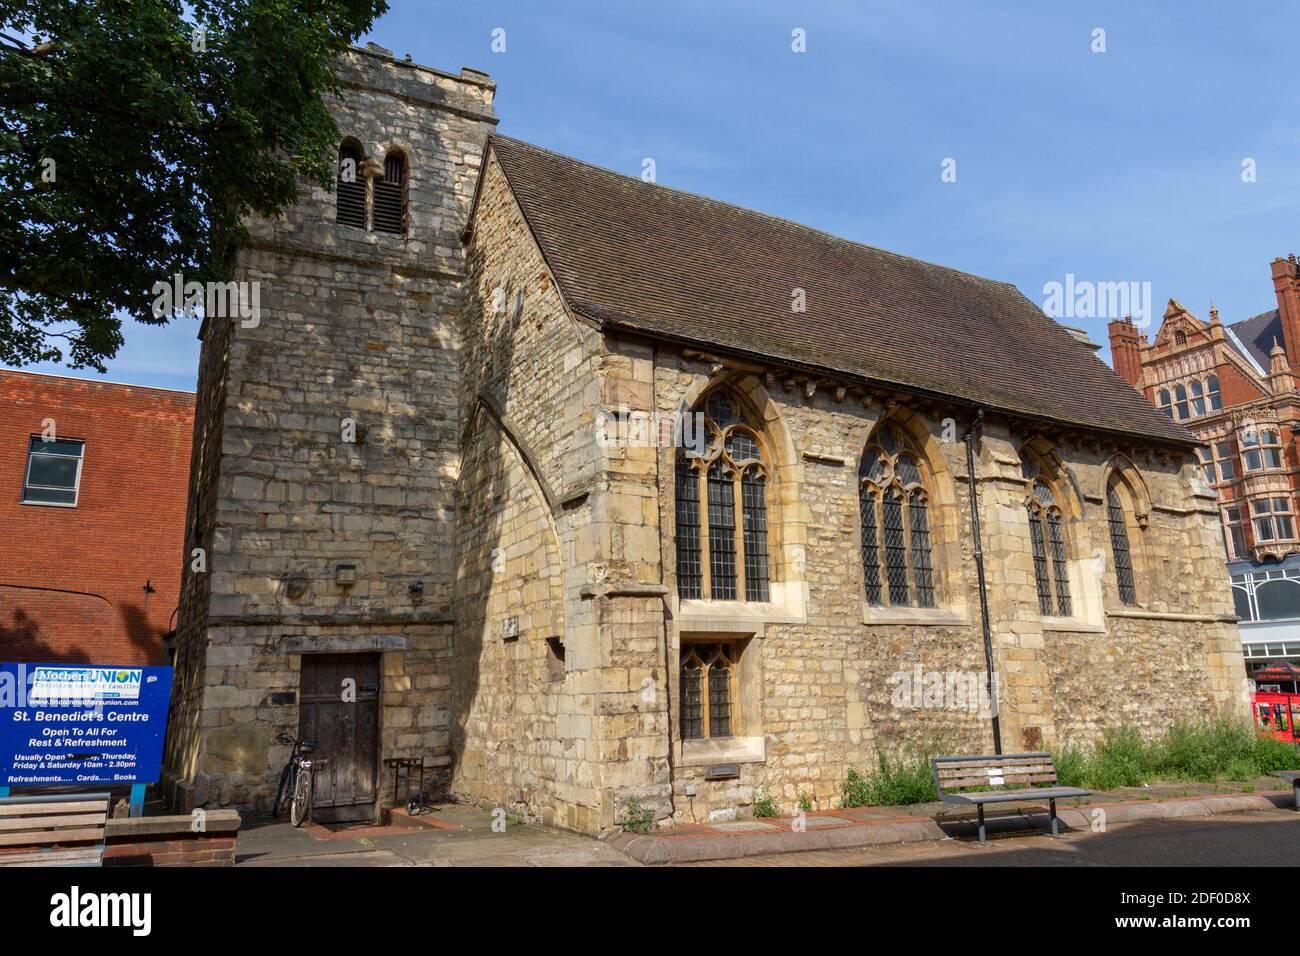 St. Benedict's Church, now St. Benedict's Centre, Lincoln, Lincolnshire, UK. Stock Photo